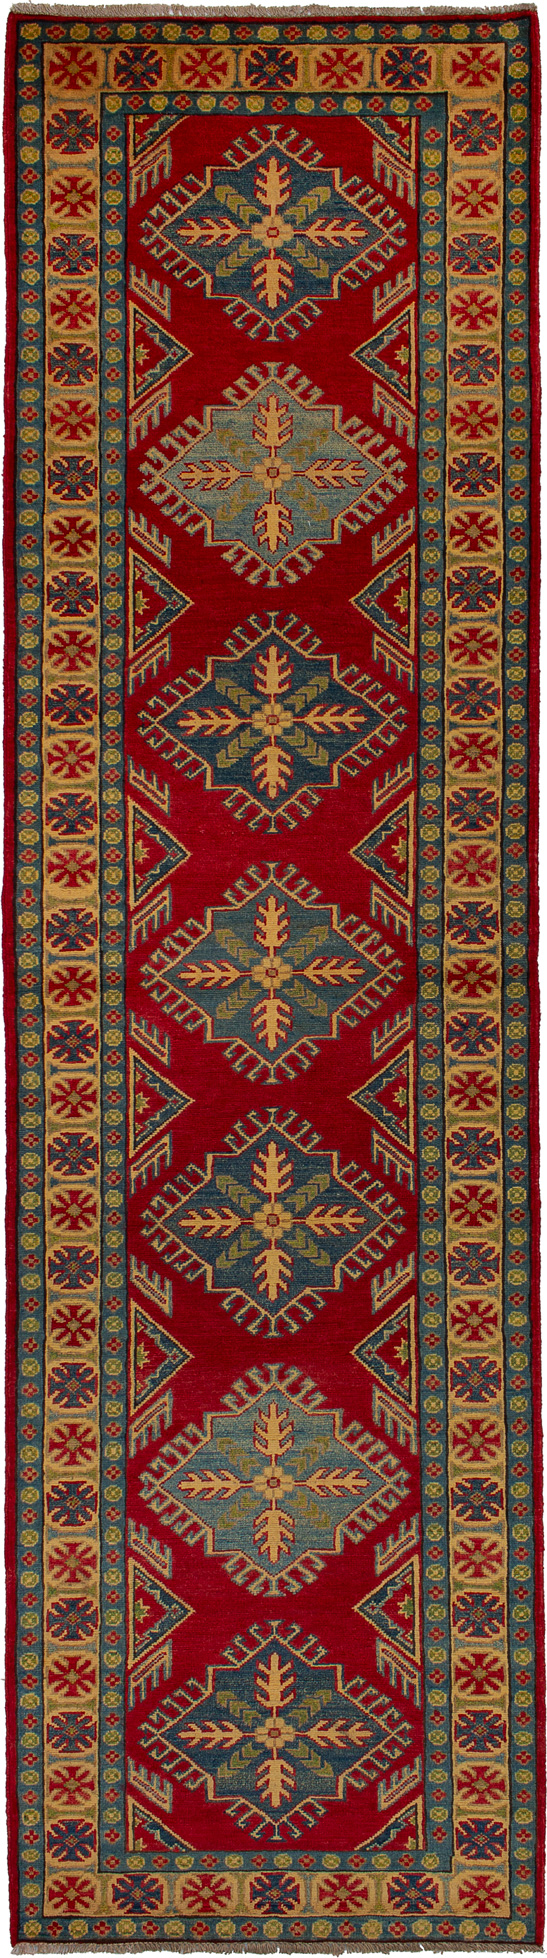 Hand-knotted Finest Gazni Red Wool Rug 2'9" x 10'2" Size: 2'9" x 10'2"  